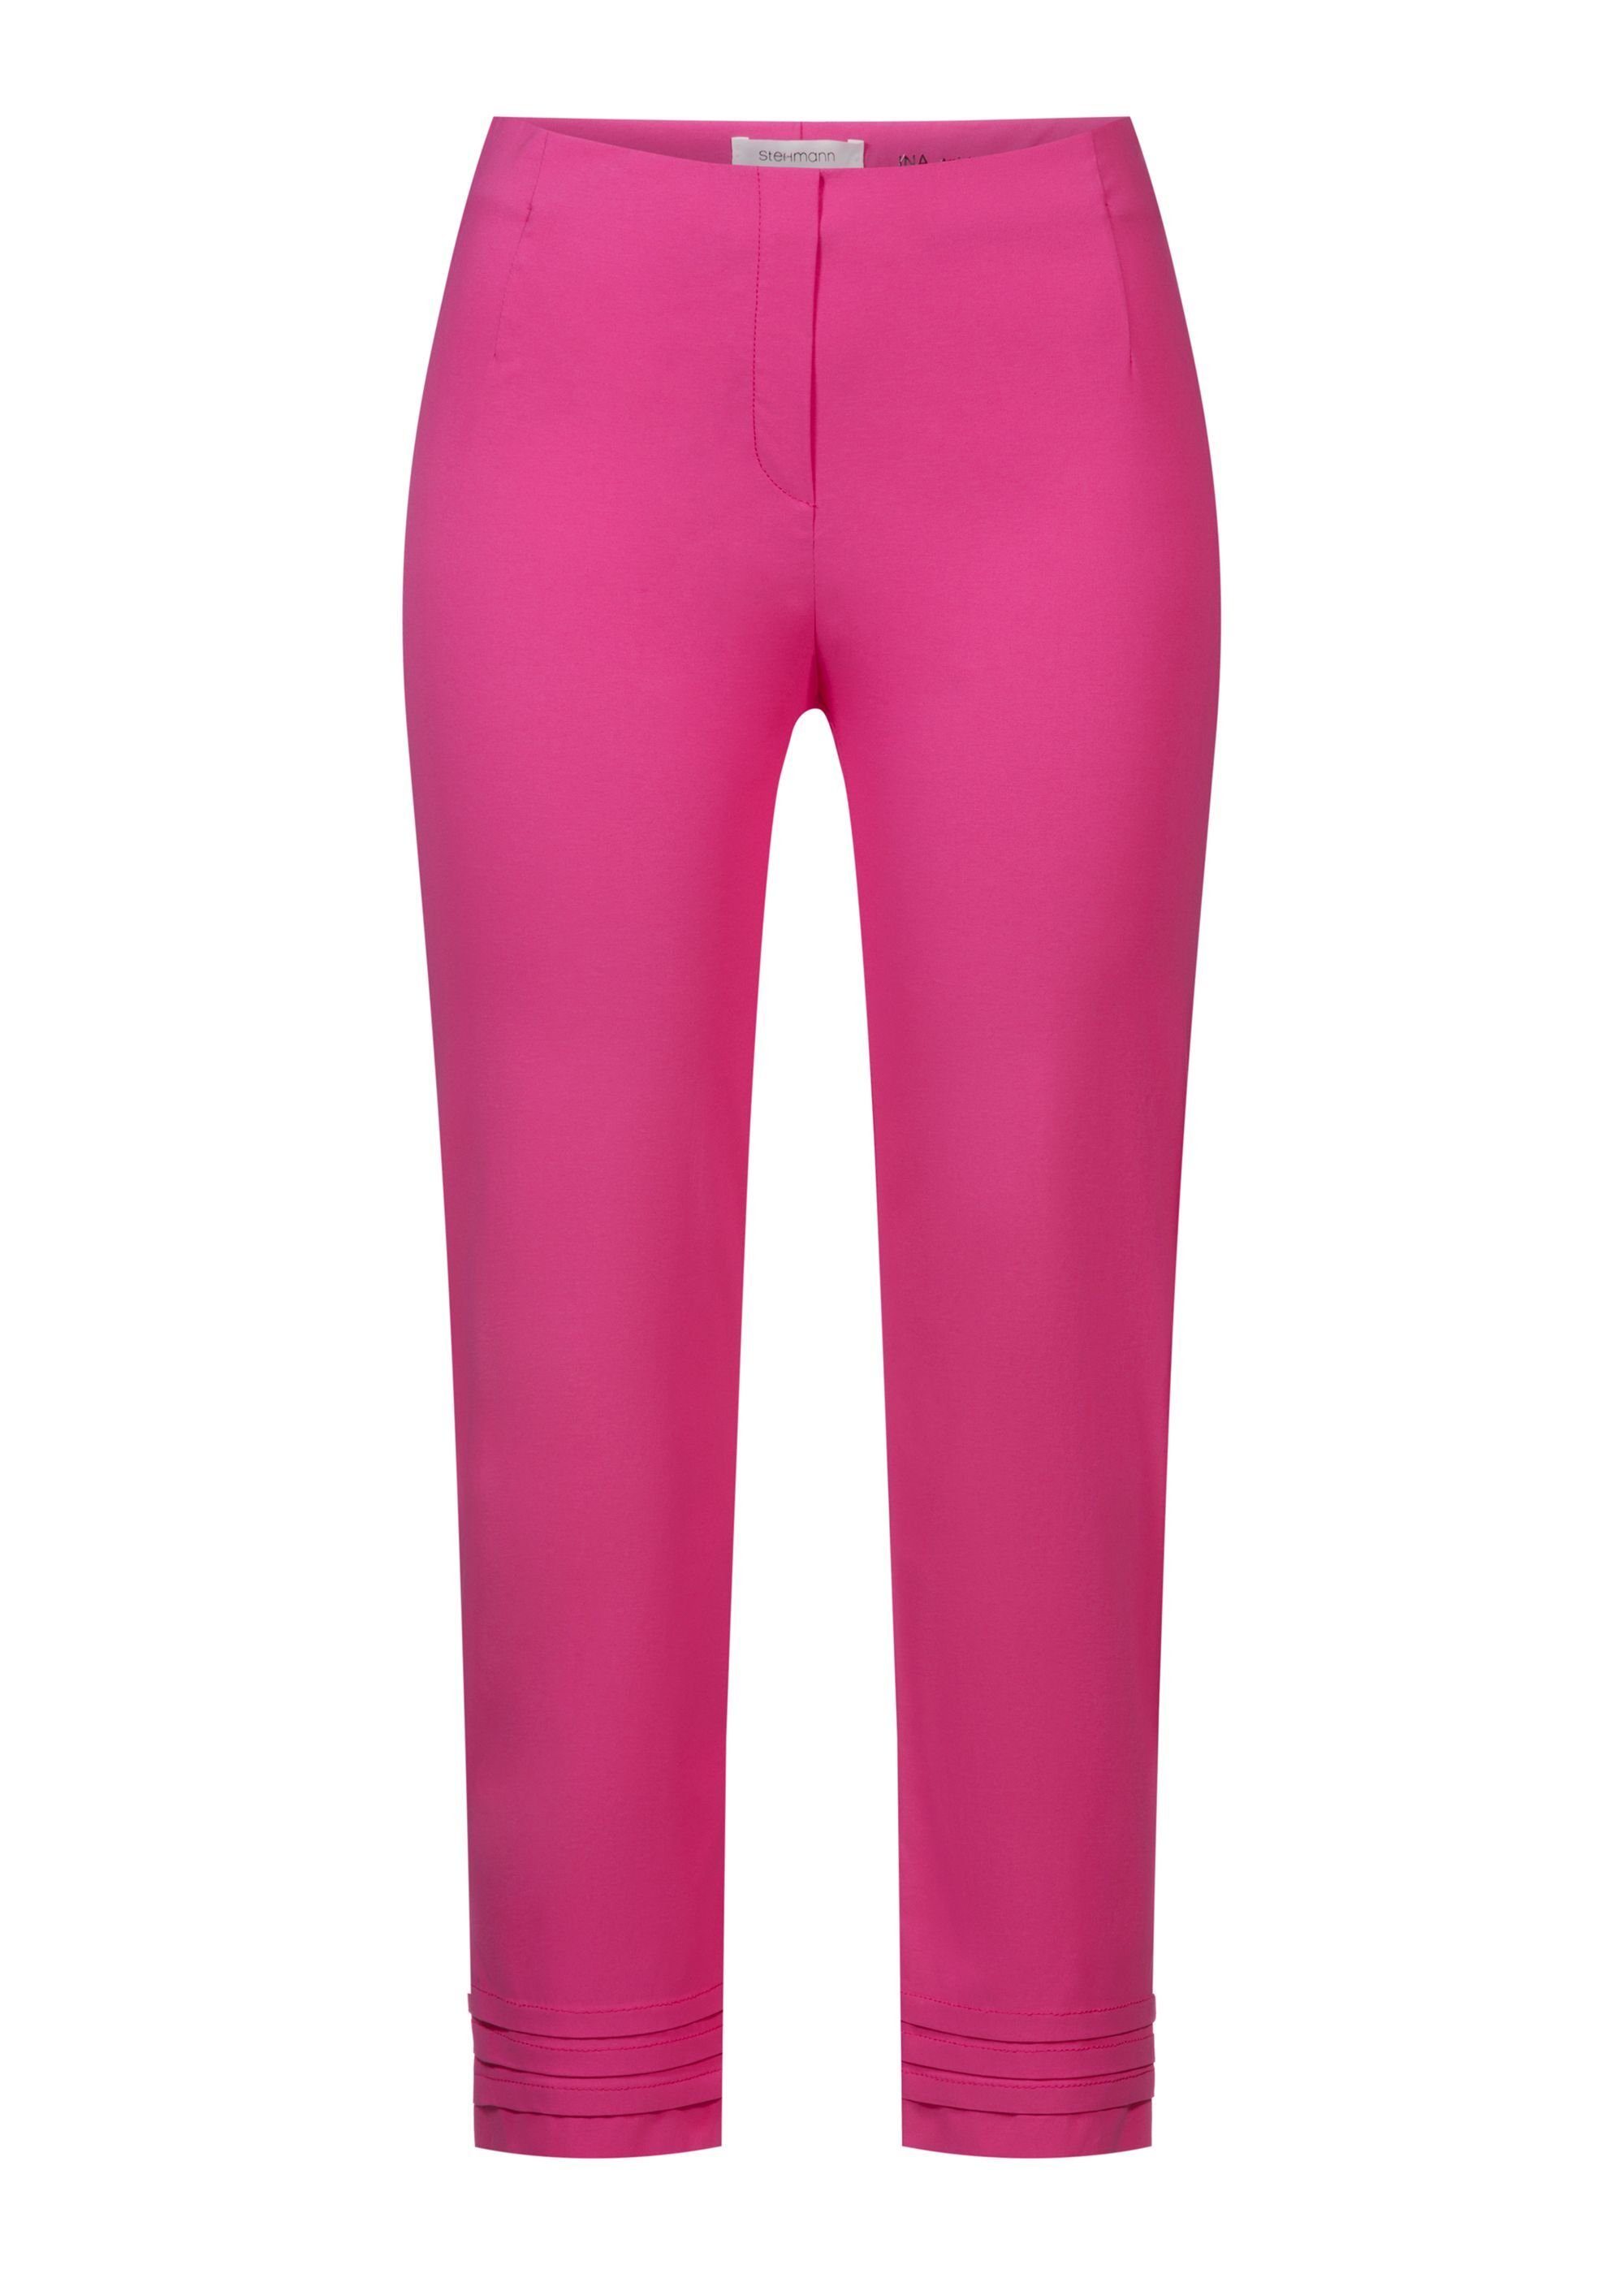 Faltendetails fuxia Ina mit Stoffhose Stehmann fluo